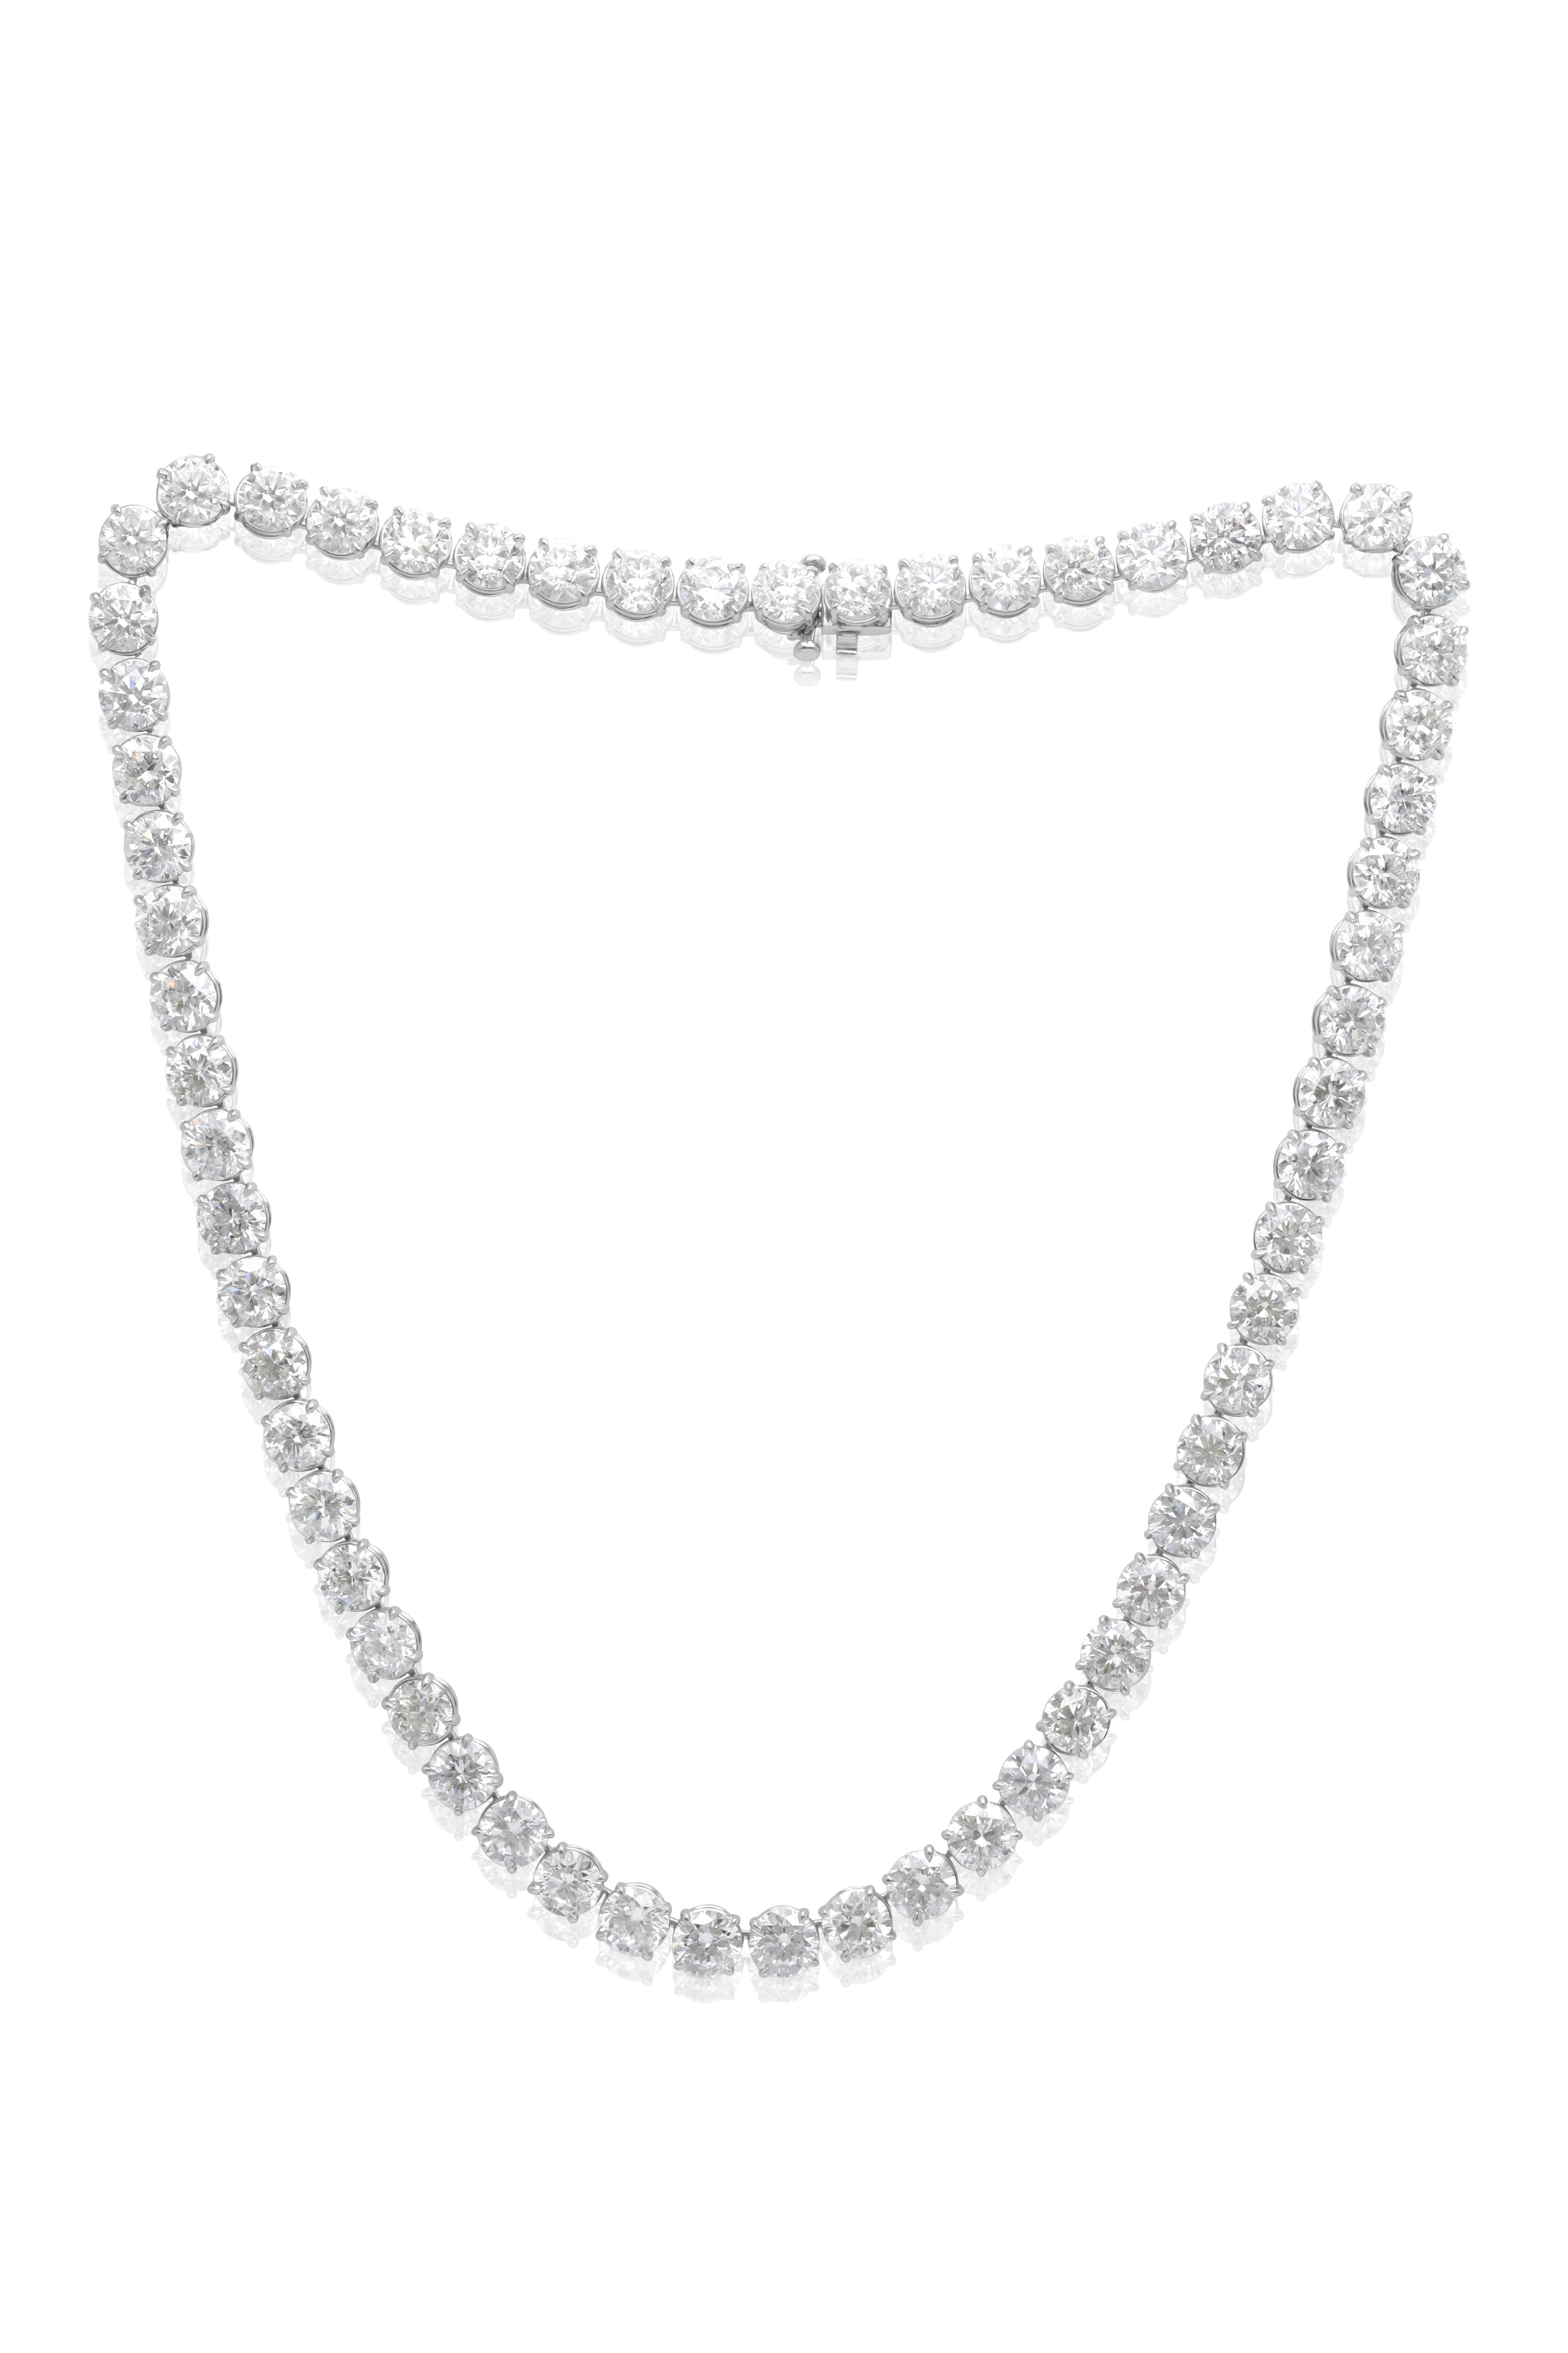 Round Cut Diana M. Platinum Tennis Necklace Featuring 61.16 cts of Round Diamonds  For Sale